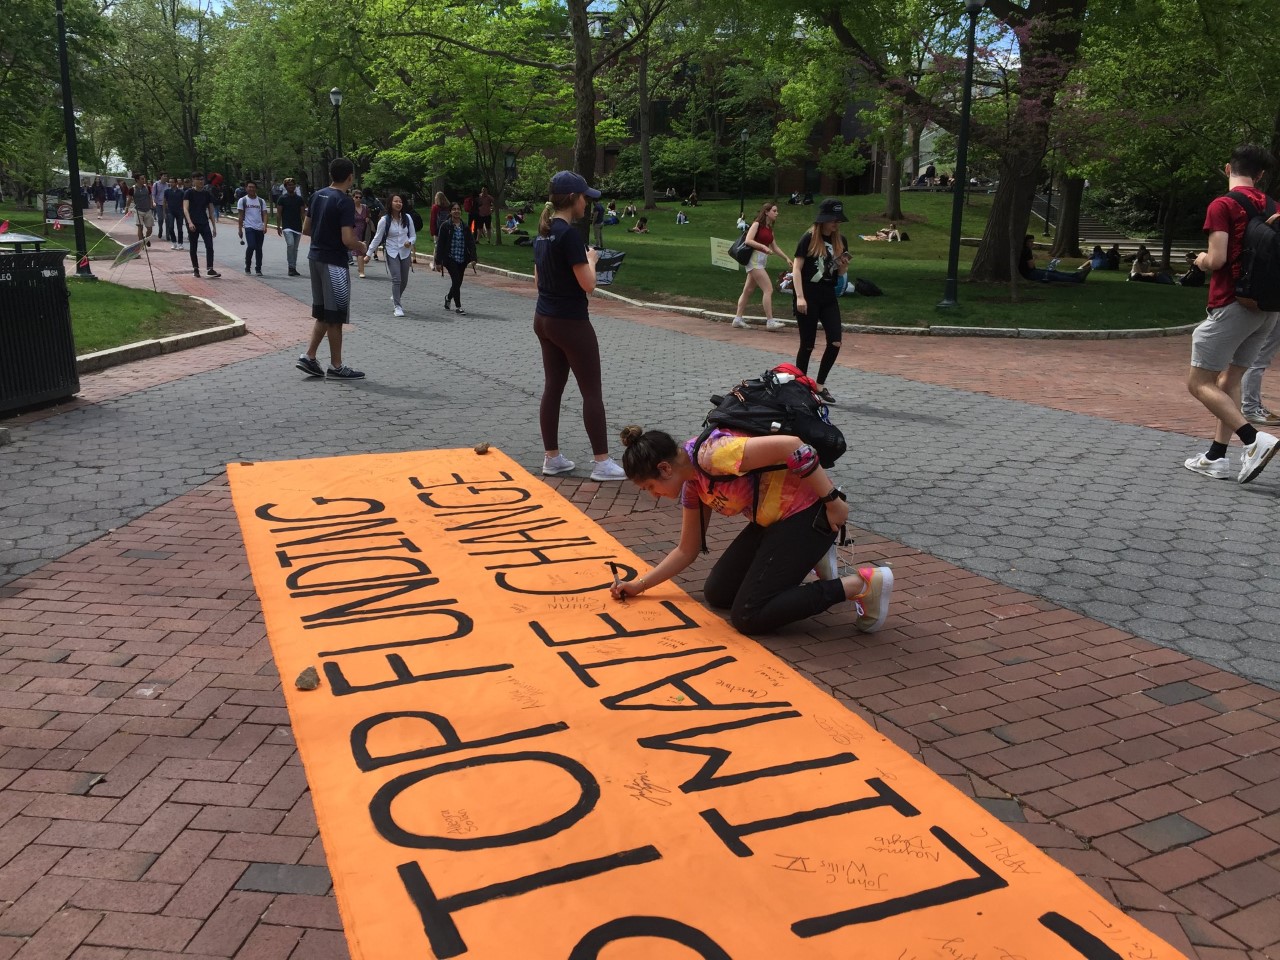 student adds signature to banner reading "Stop Funding Climate Change"